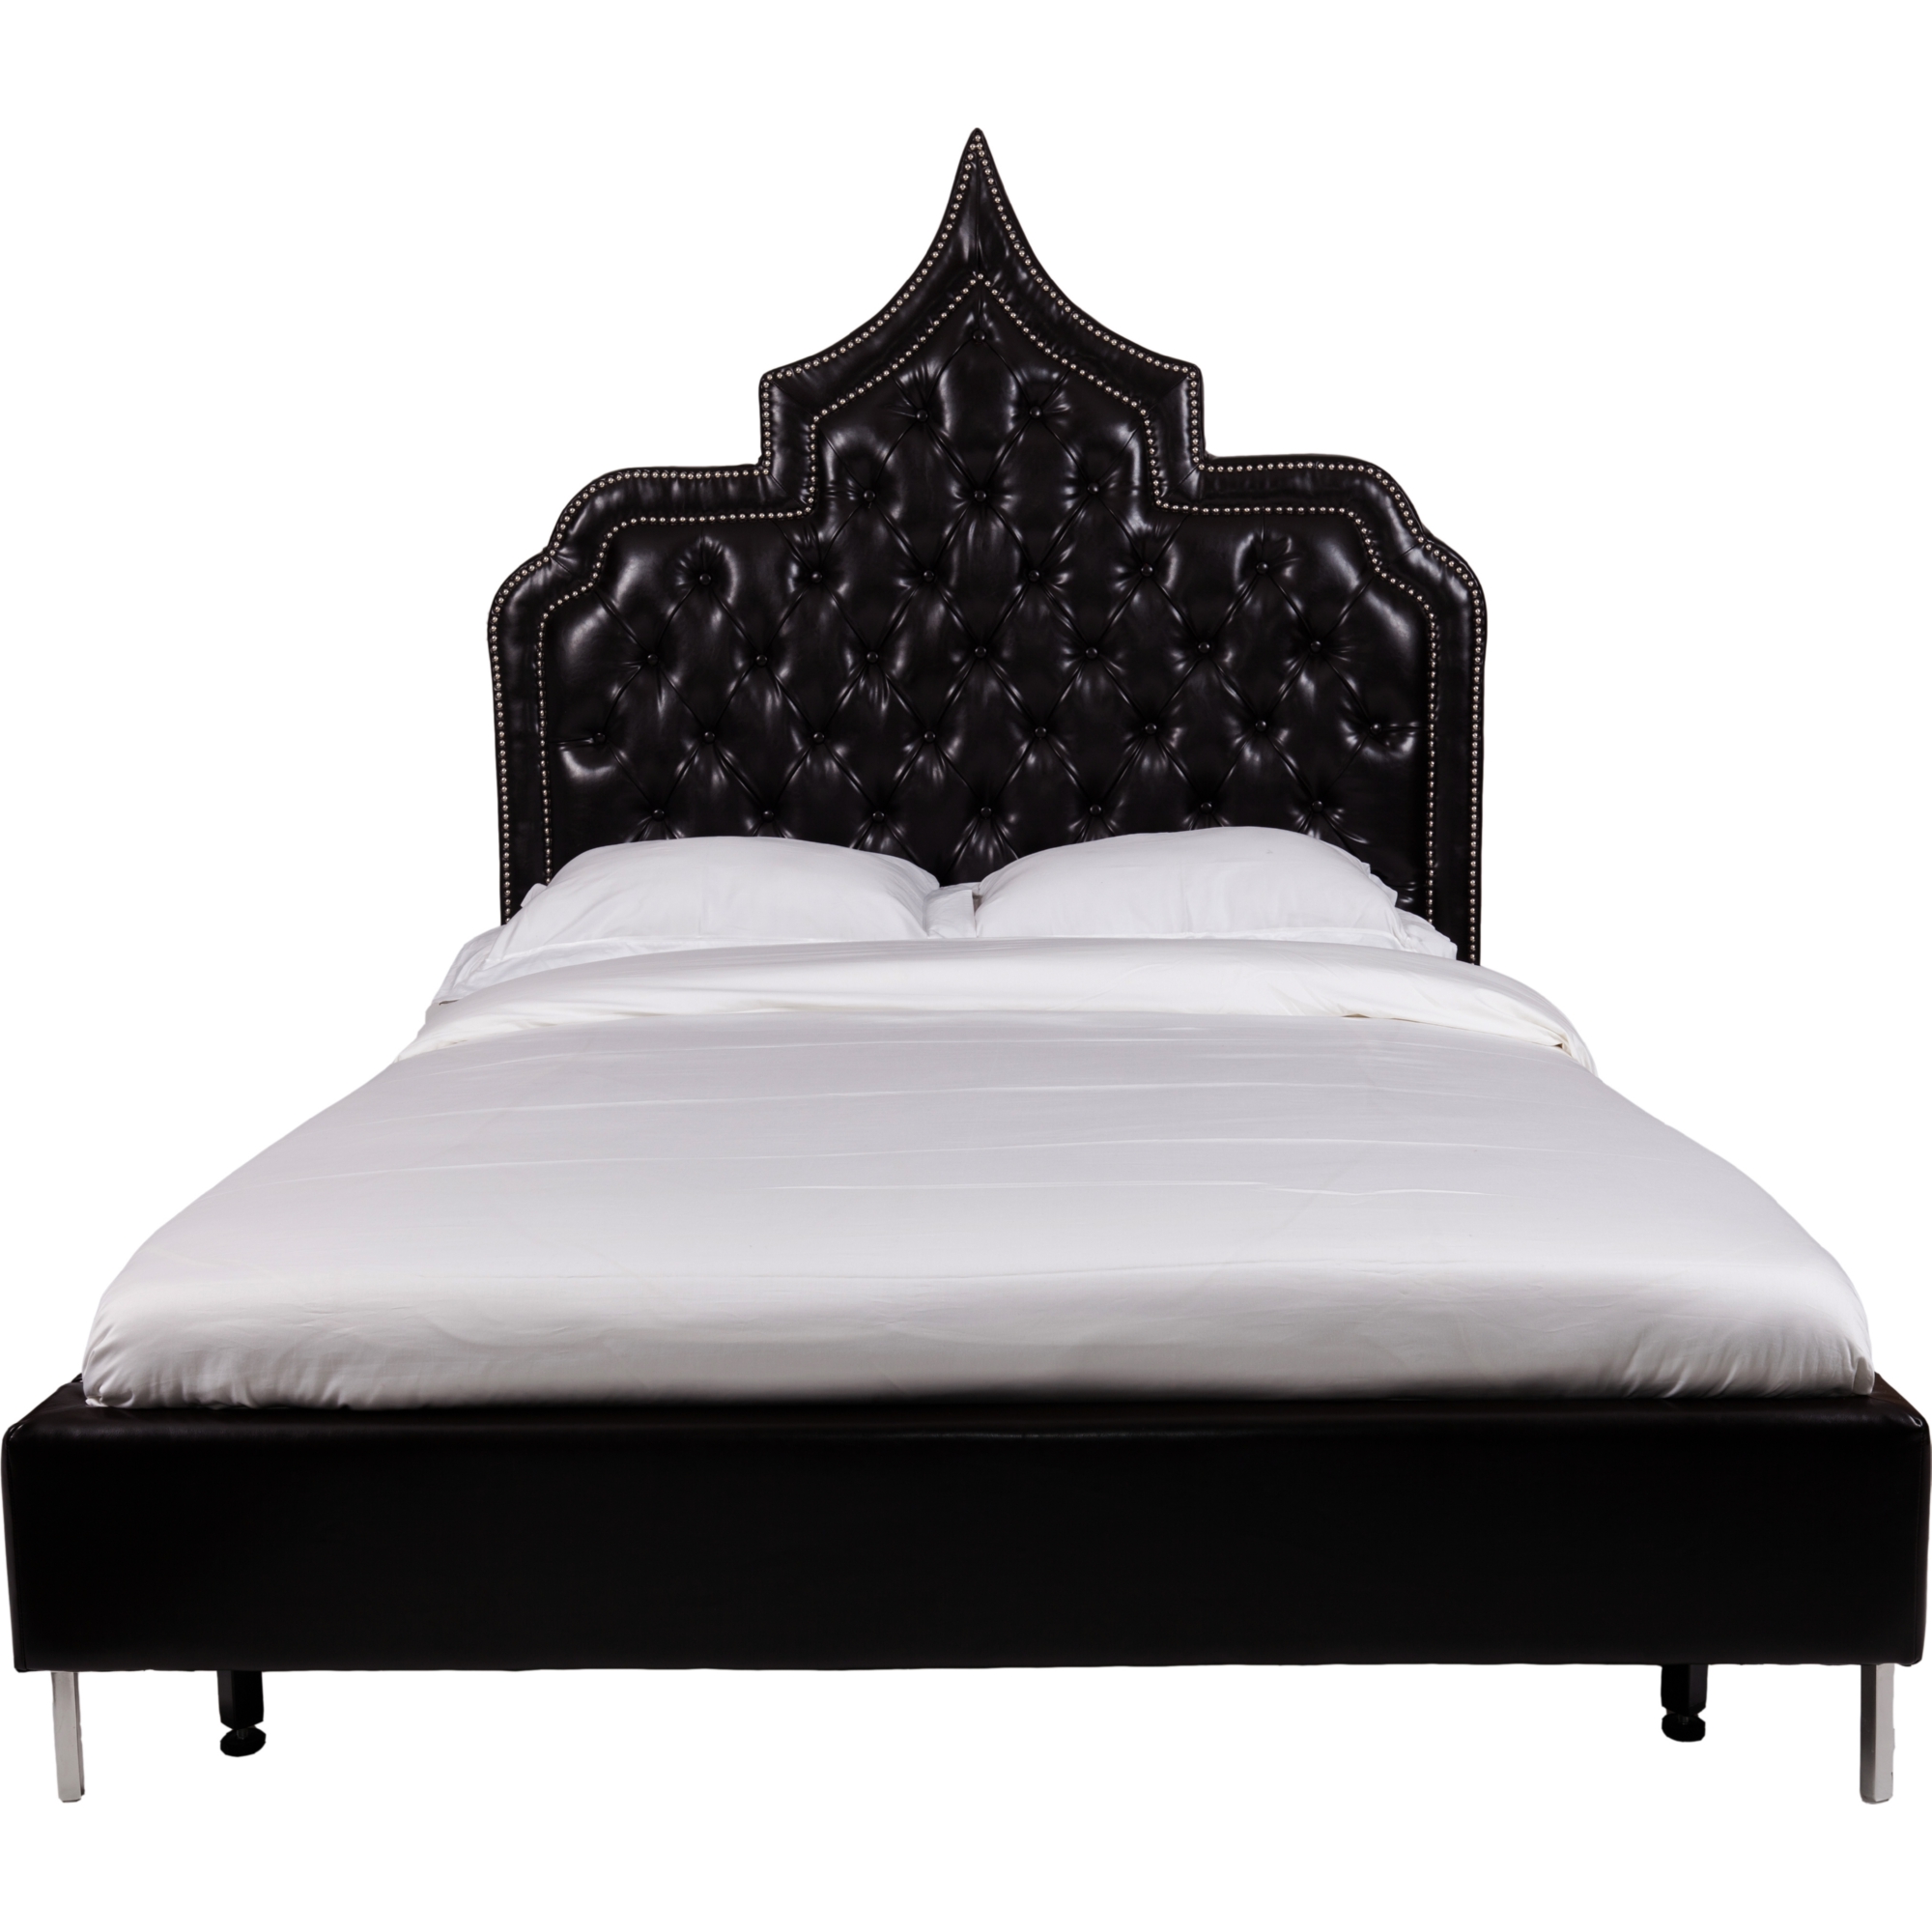 Chic Iconic Bd15 13bk K1 Dr Casablanca, Victorian King Bed